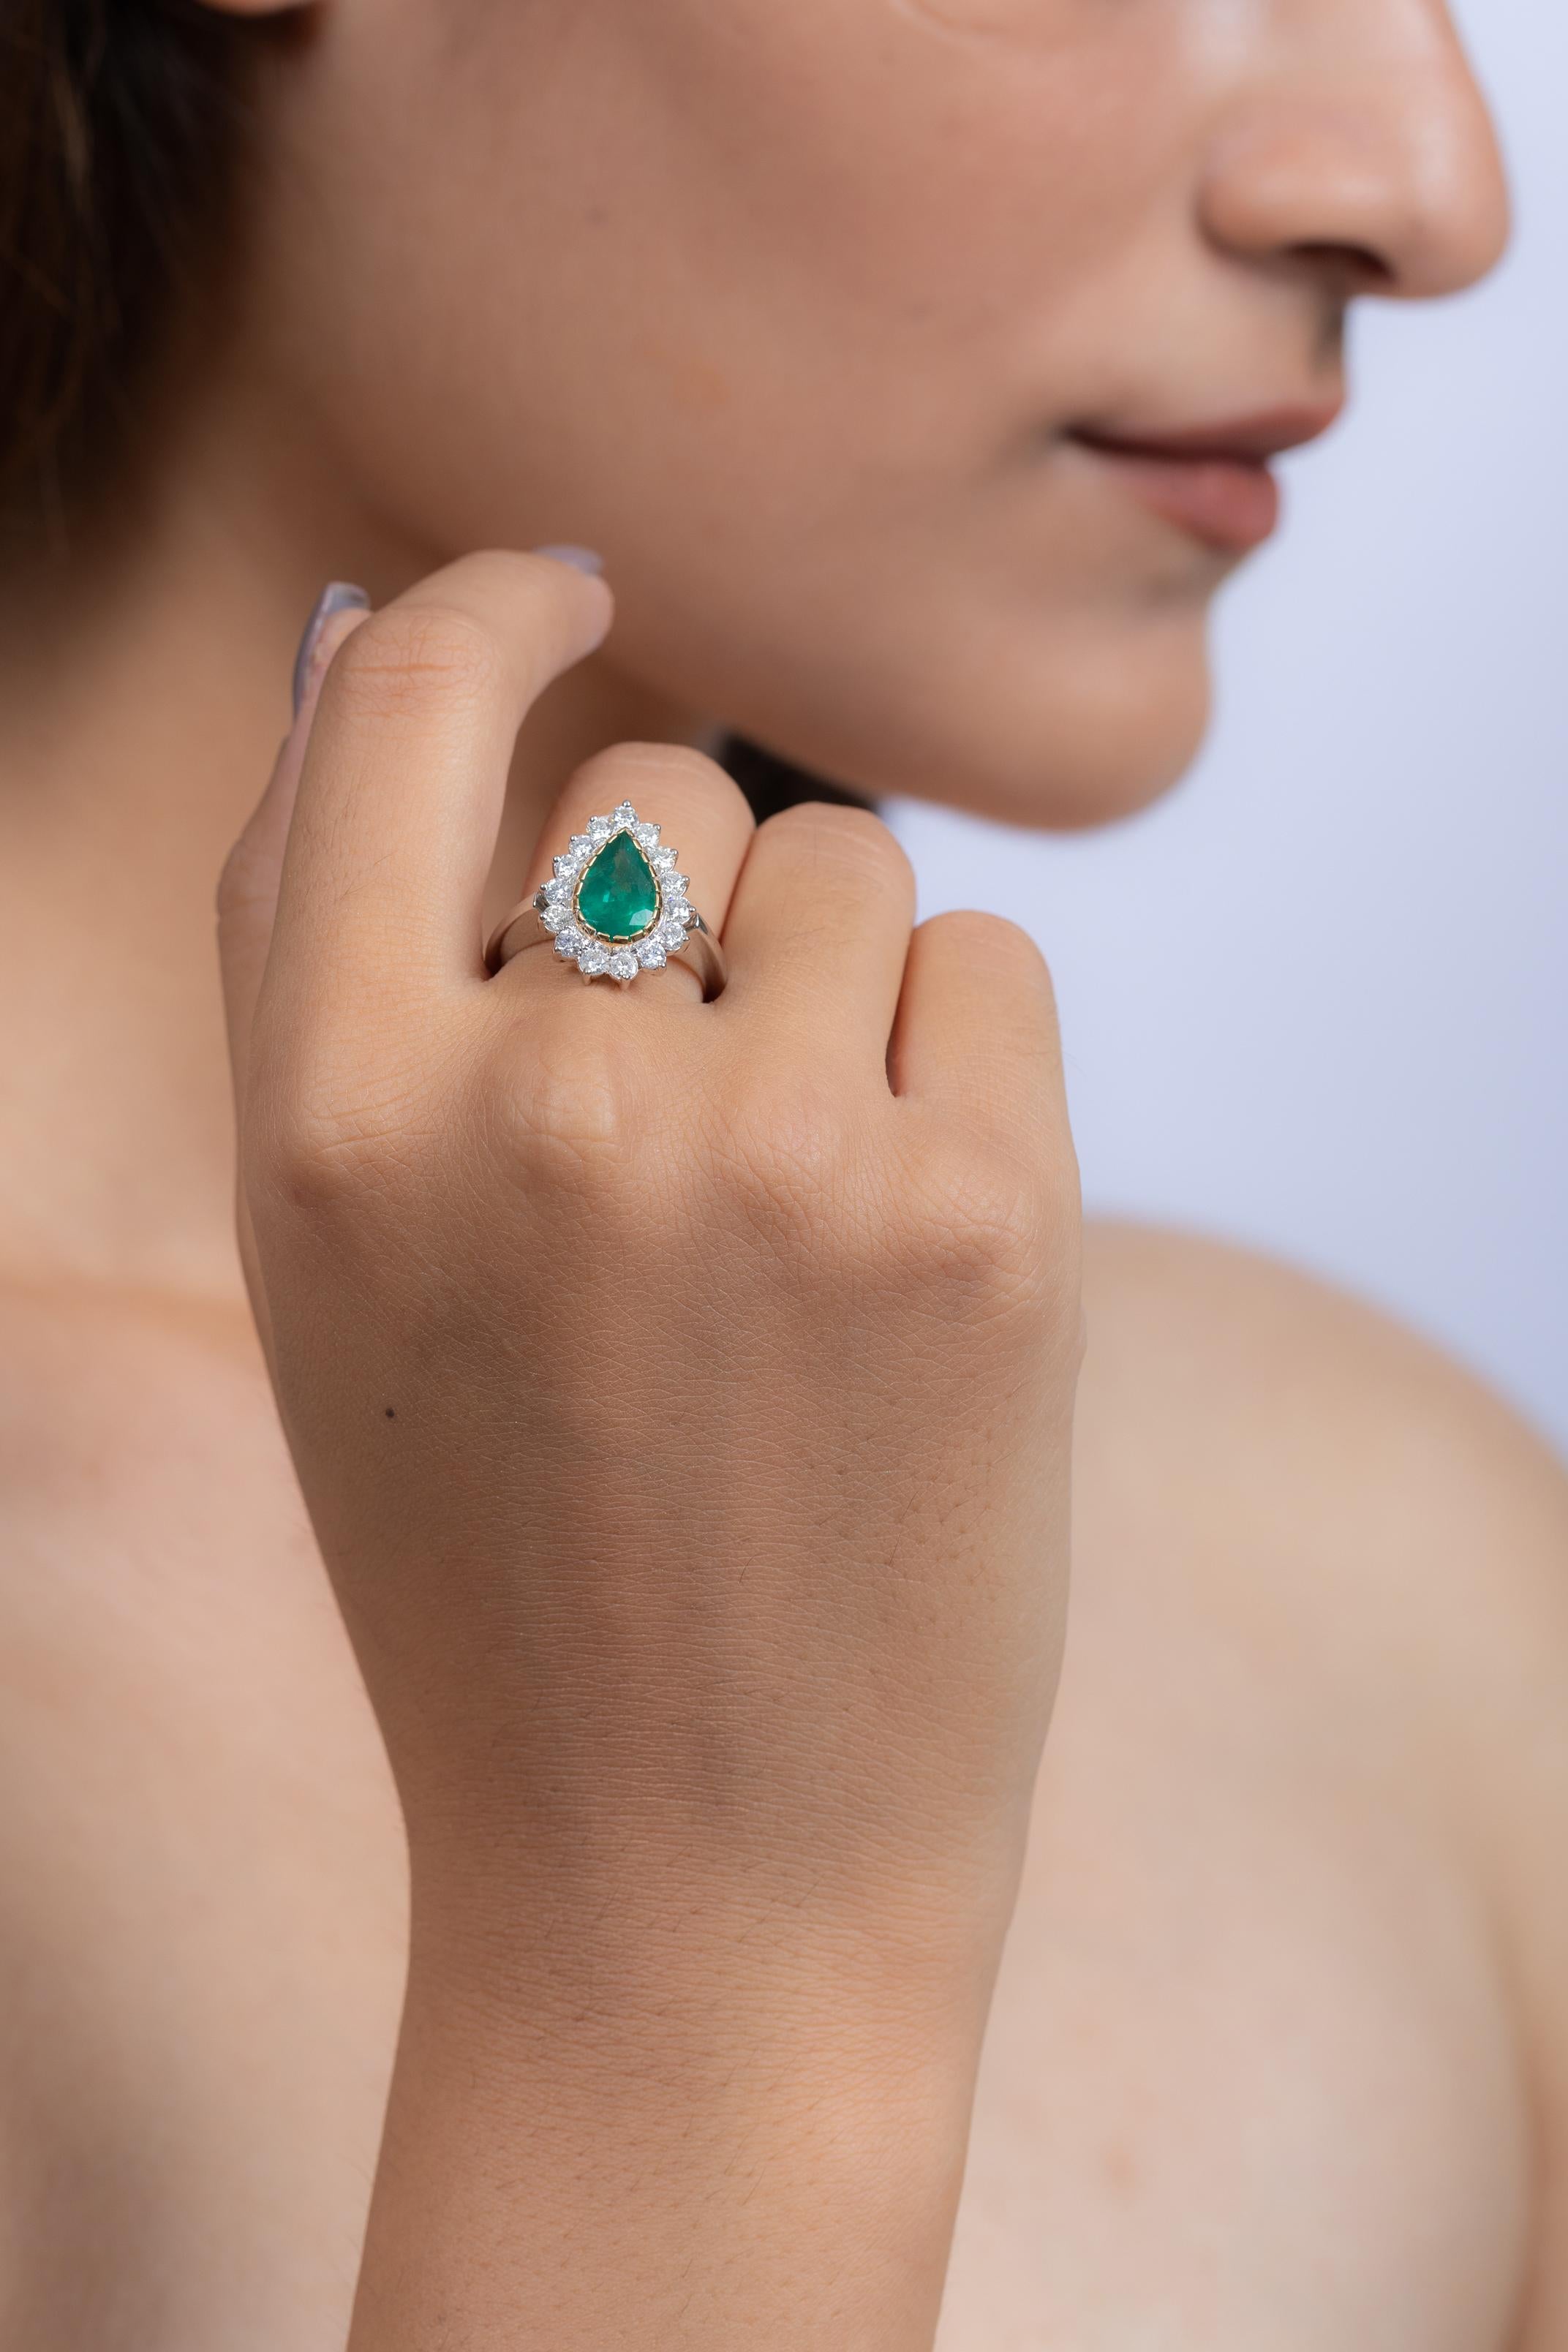 For Sale:  Statement 18k Solid White Gold Pear Emerald Halo Wedding Ring with Diamonds 6